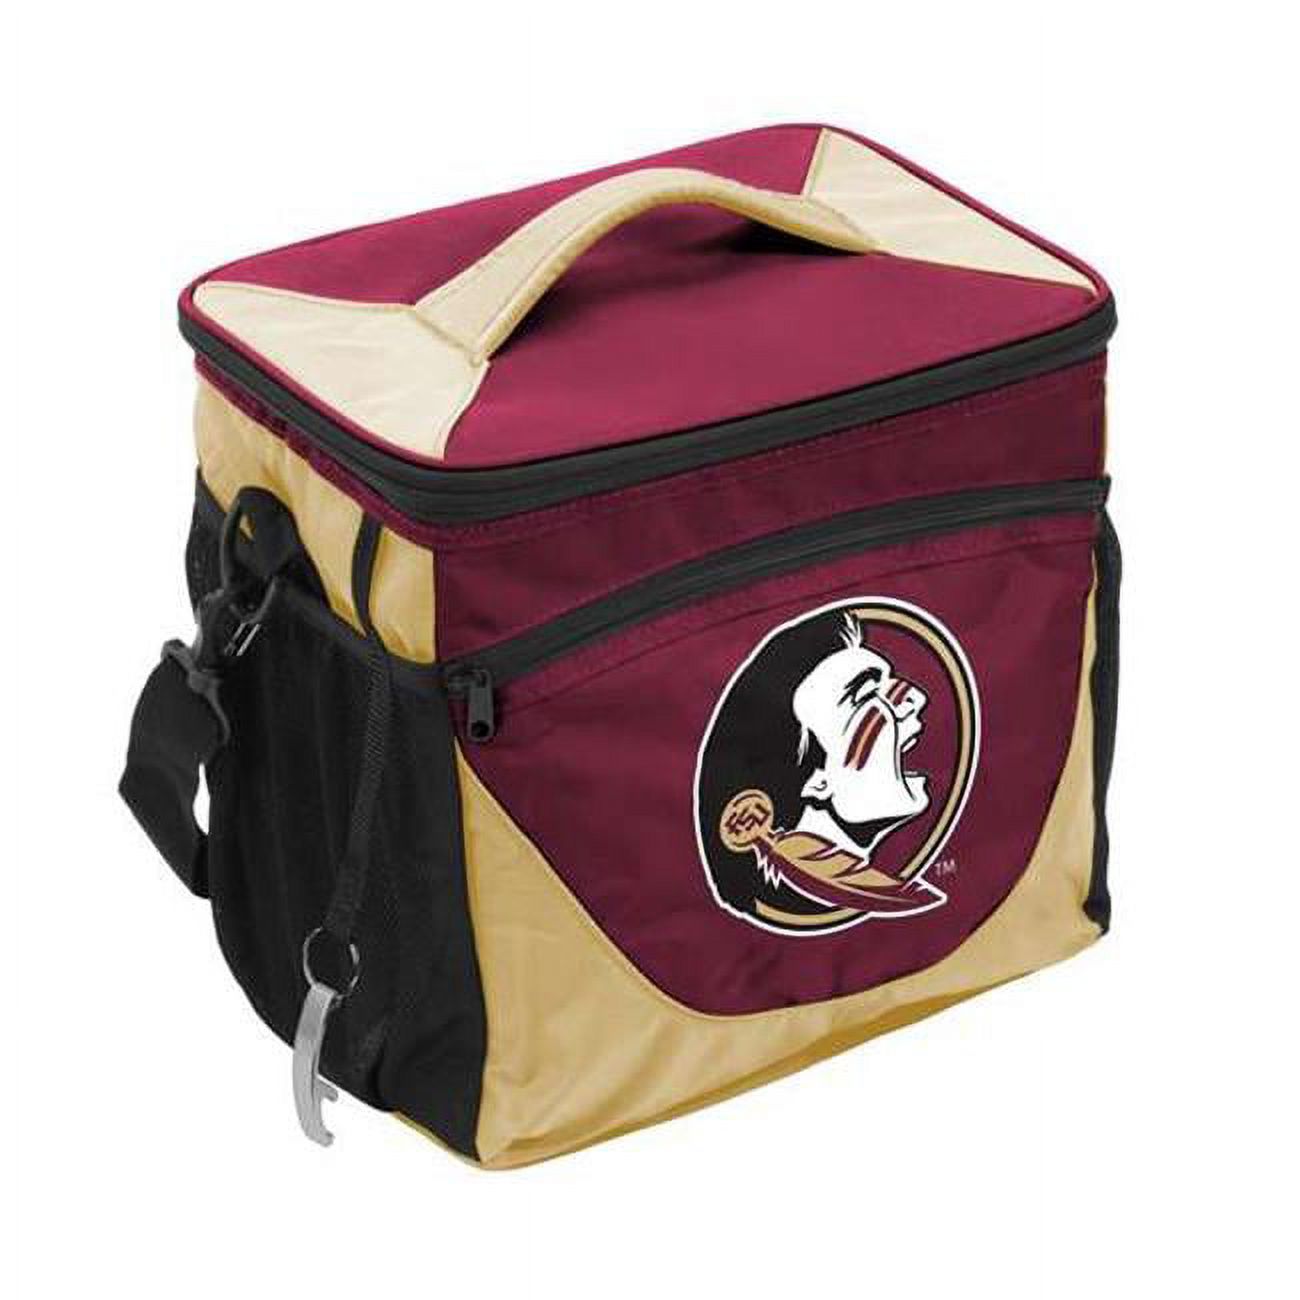 FL State Seminoles 24 Can Cooler - image 1 of 2